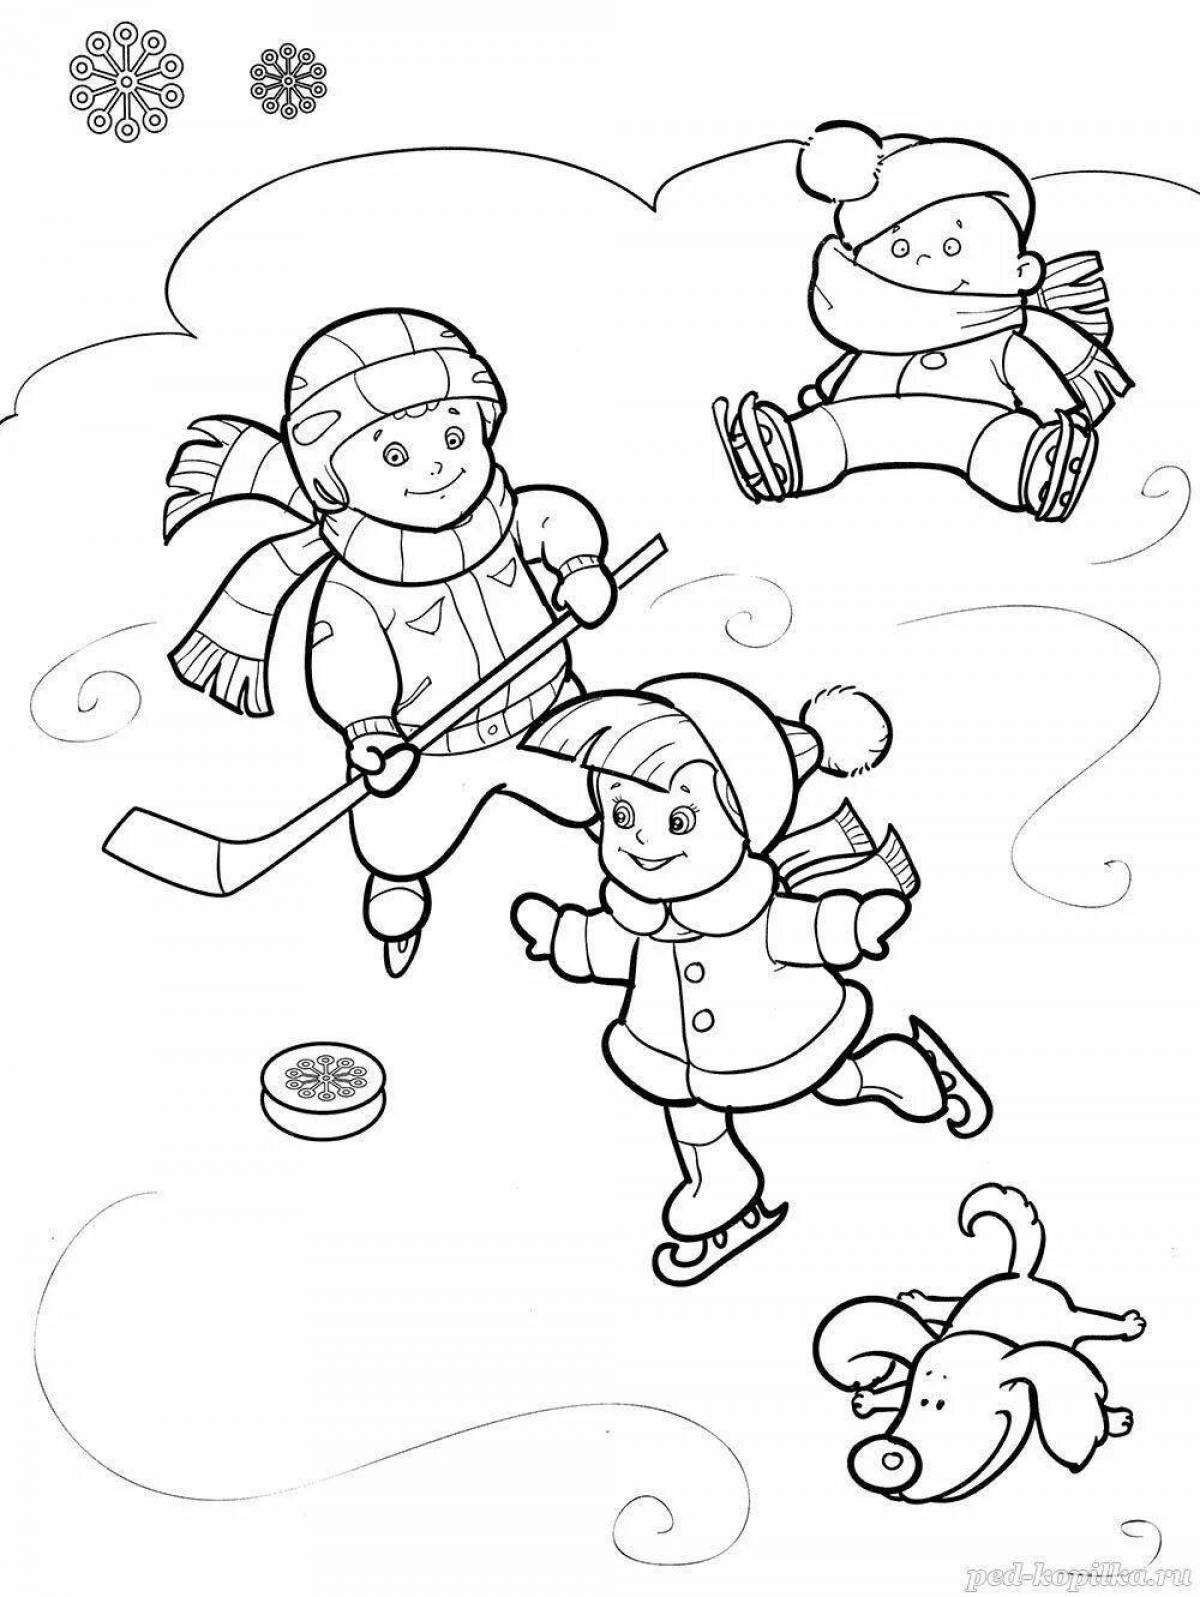 Snowball fight coloring book for kids